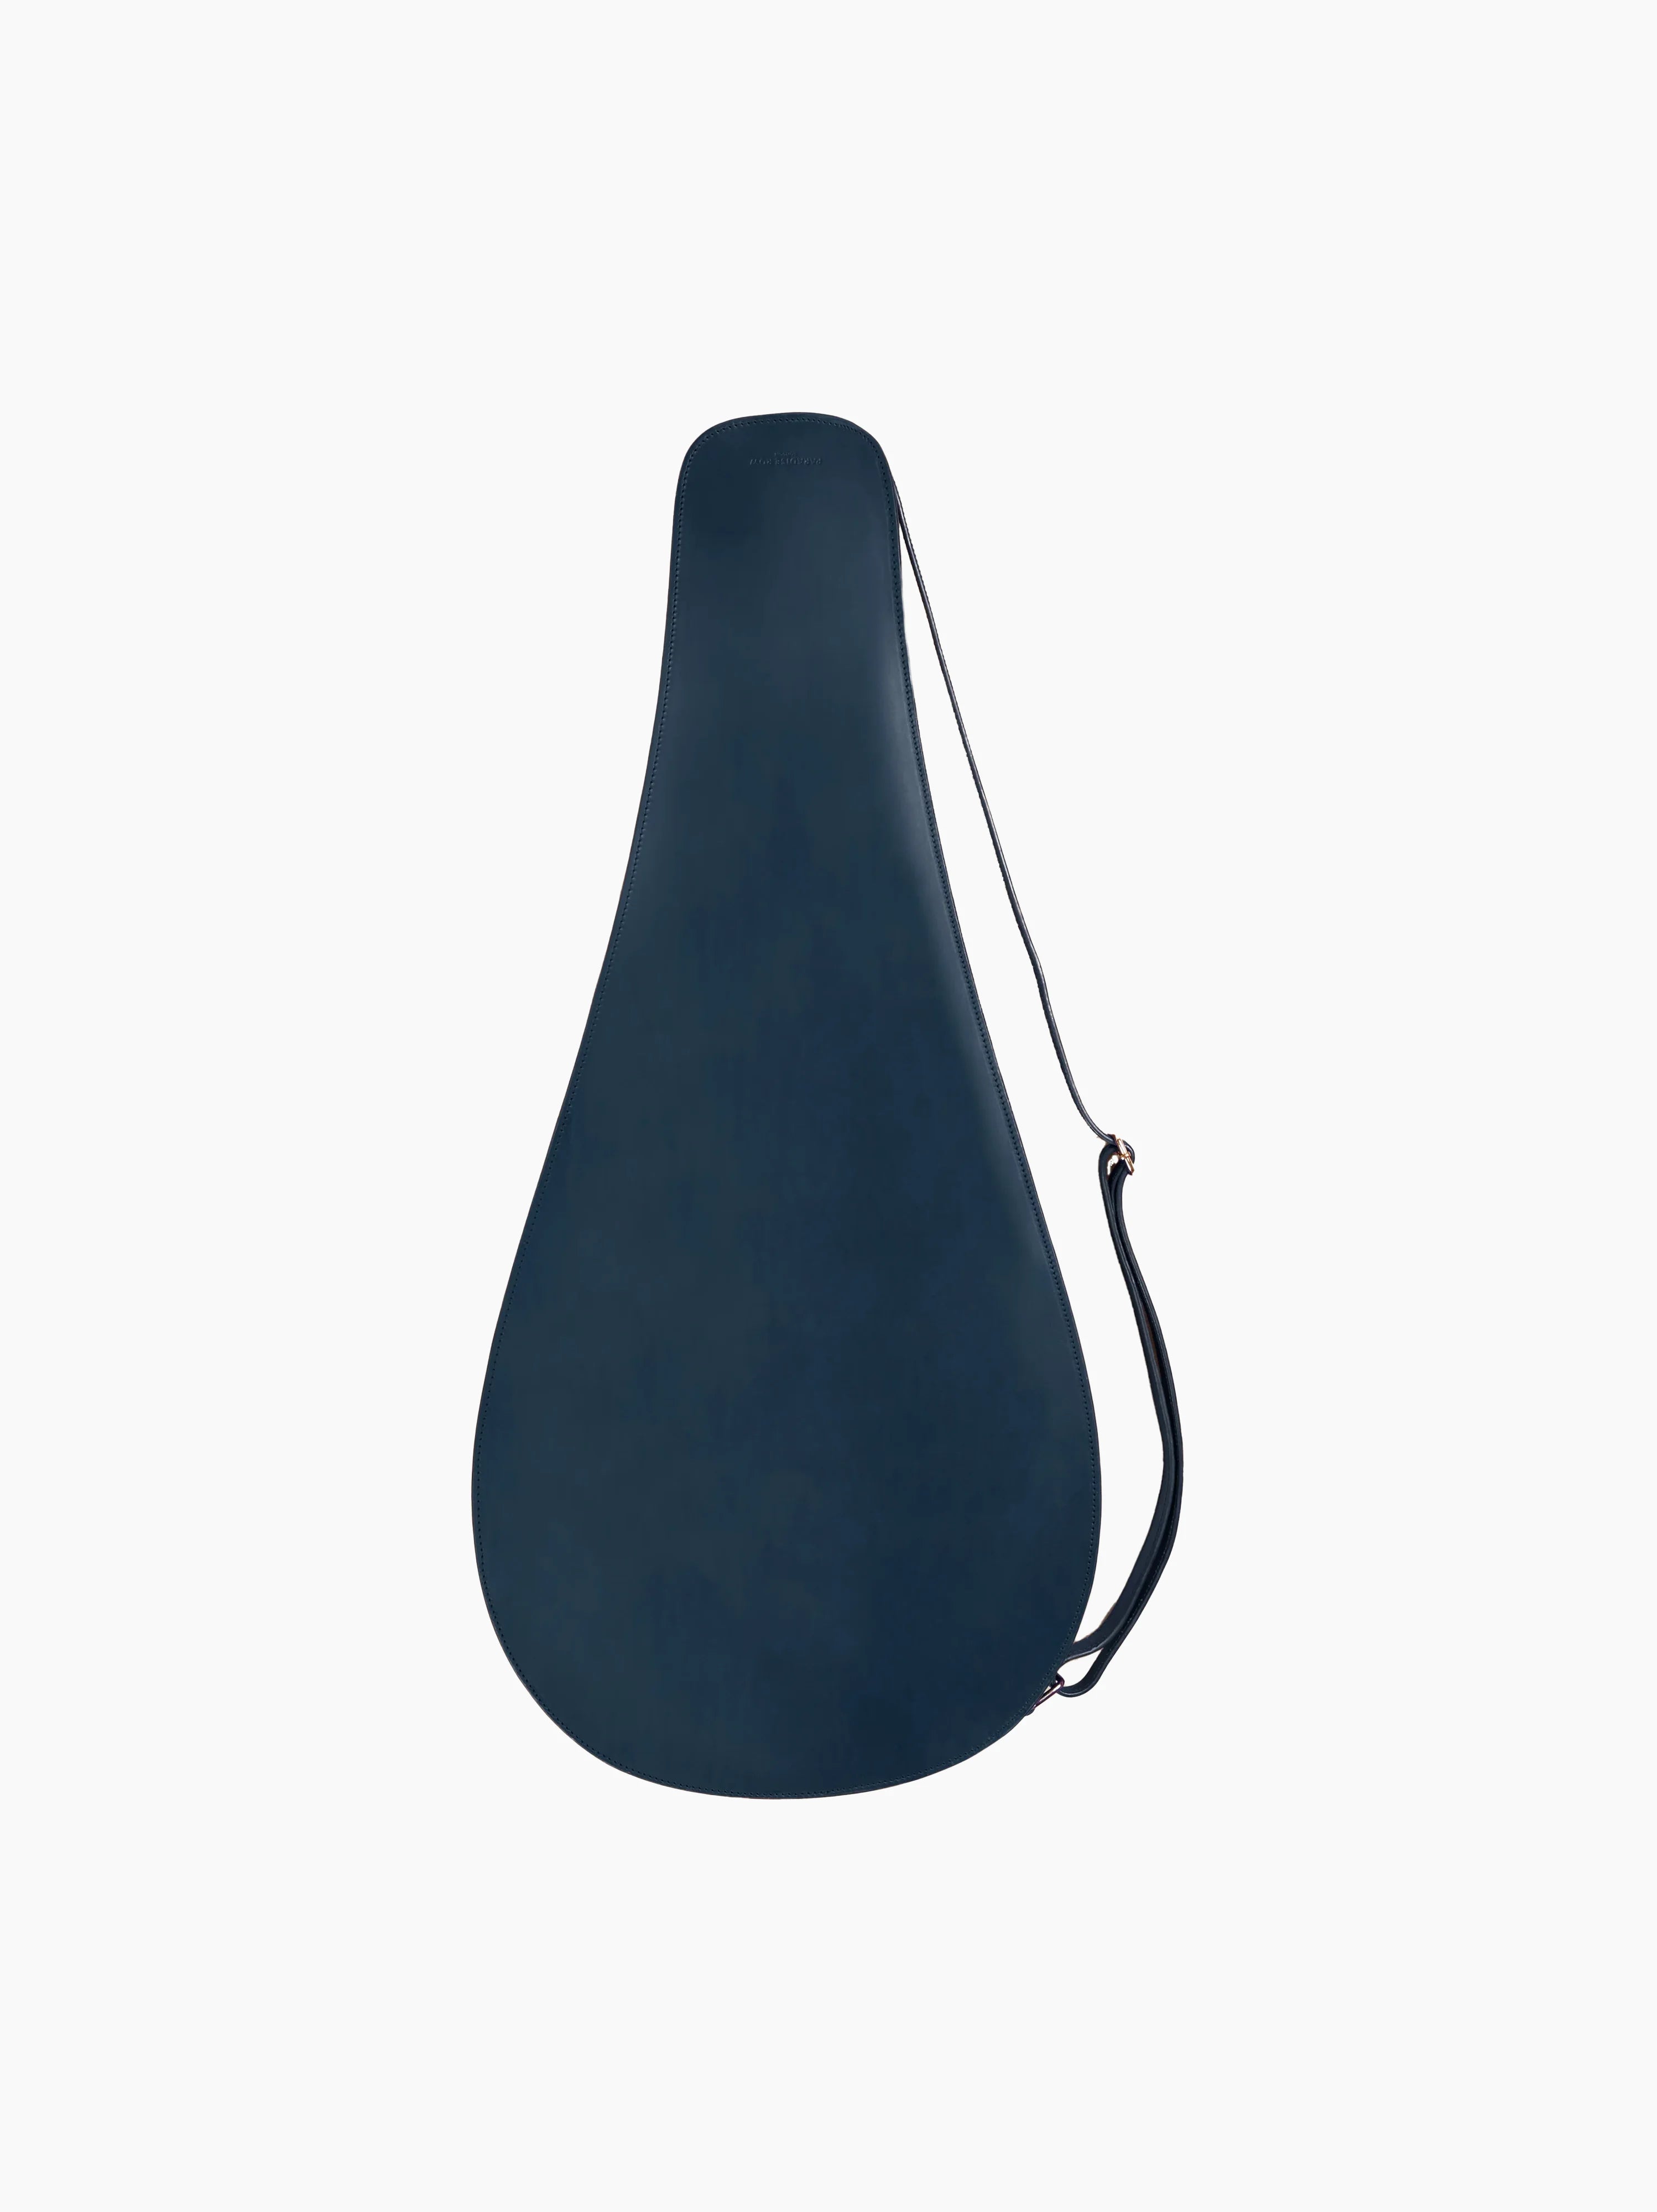 Blue Leather Tennis Racket Cover